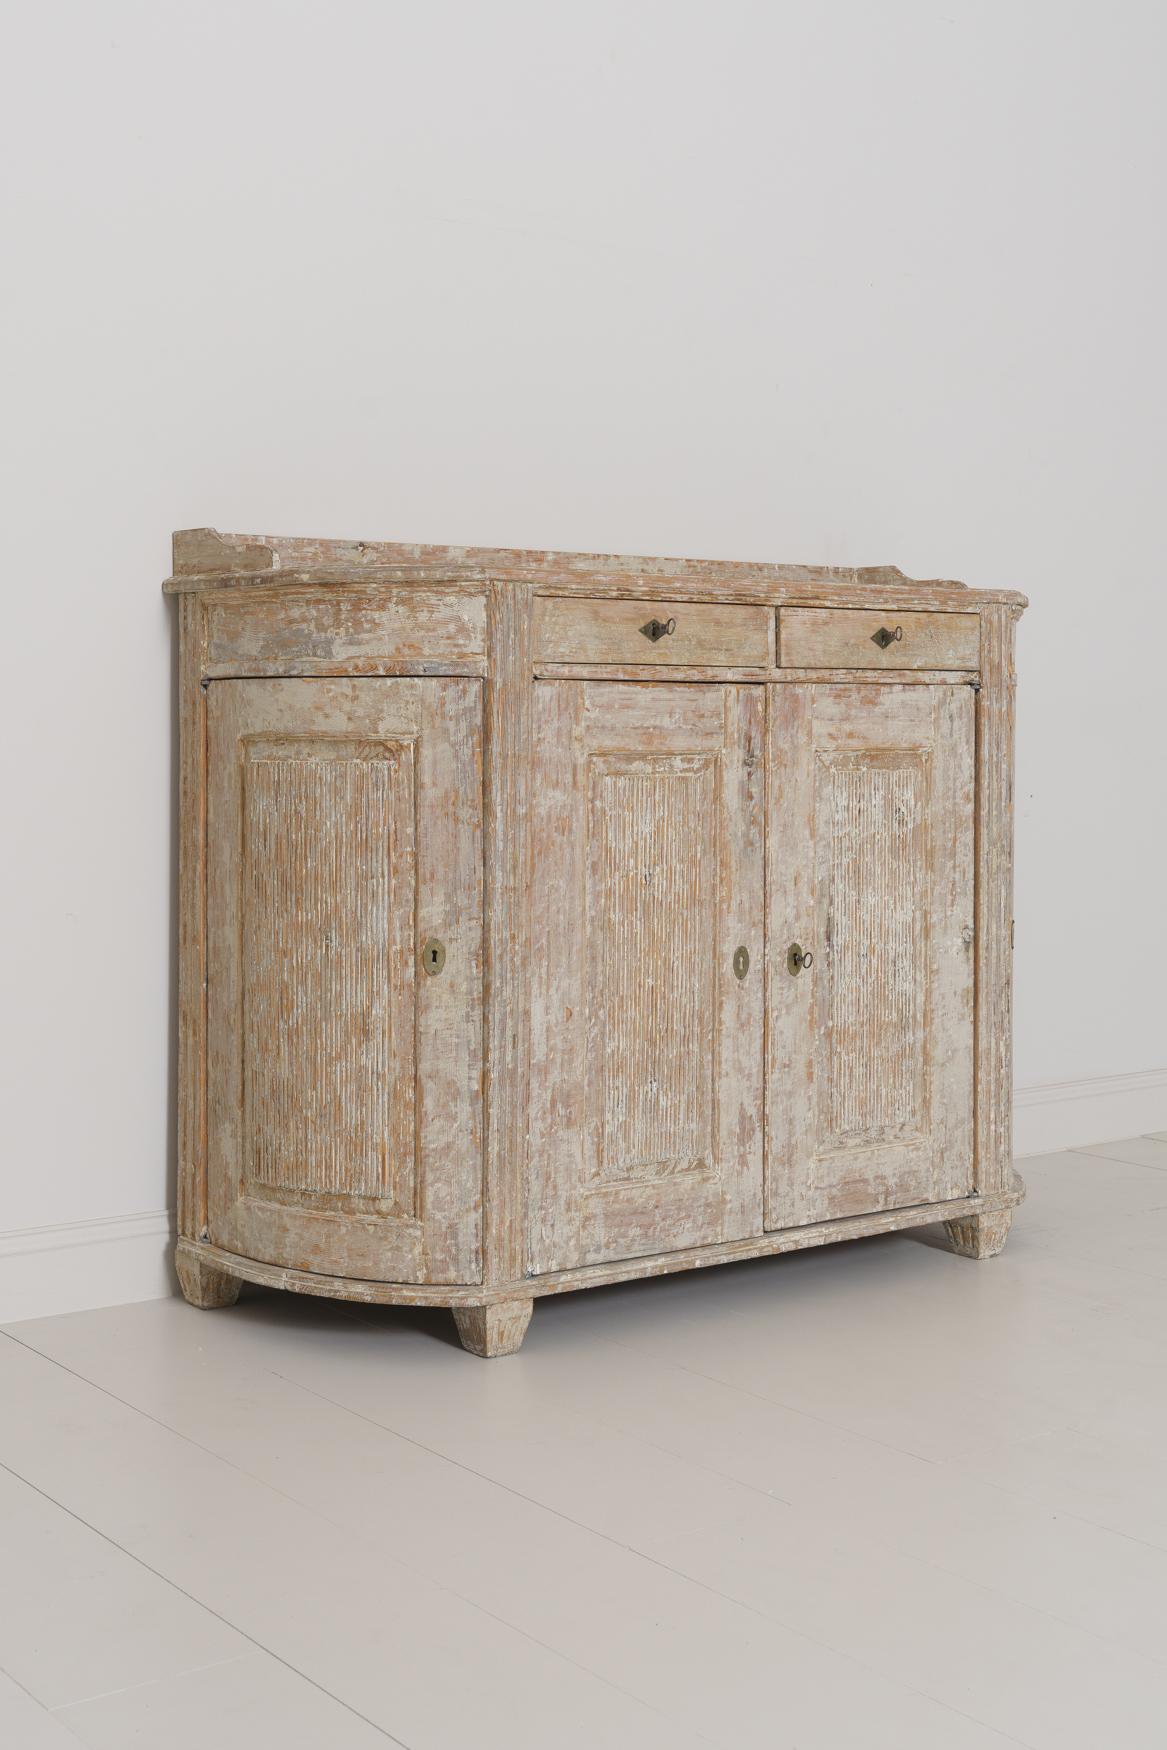 Hand-Carved 18th Century Swedish Gustavian Period Buffet In Original Paint with Reeded Doors